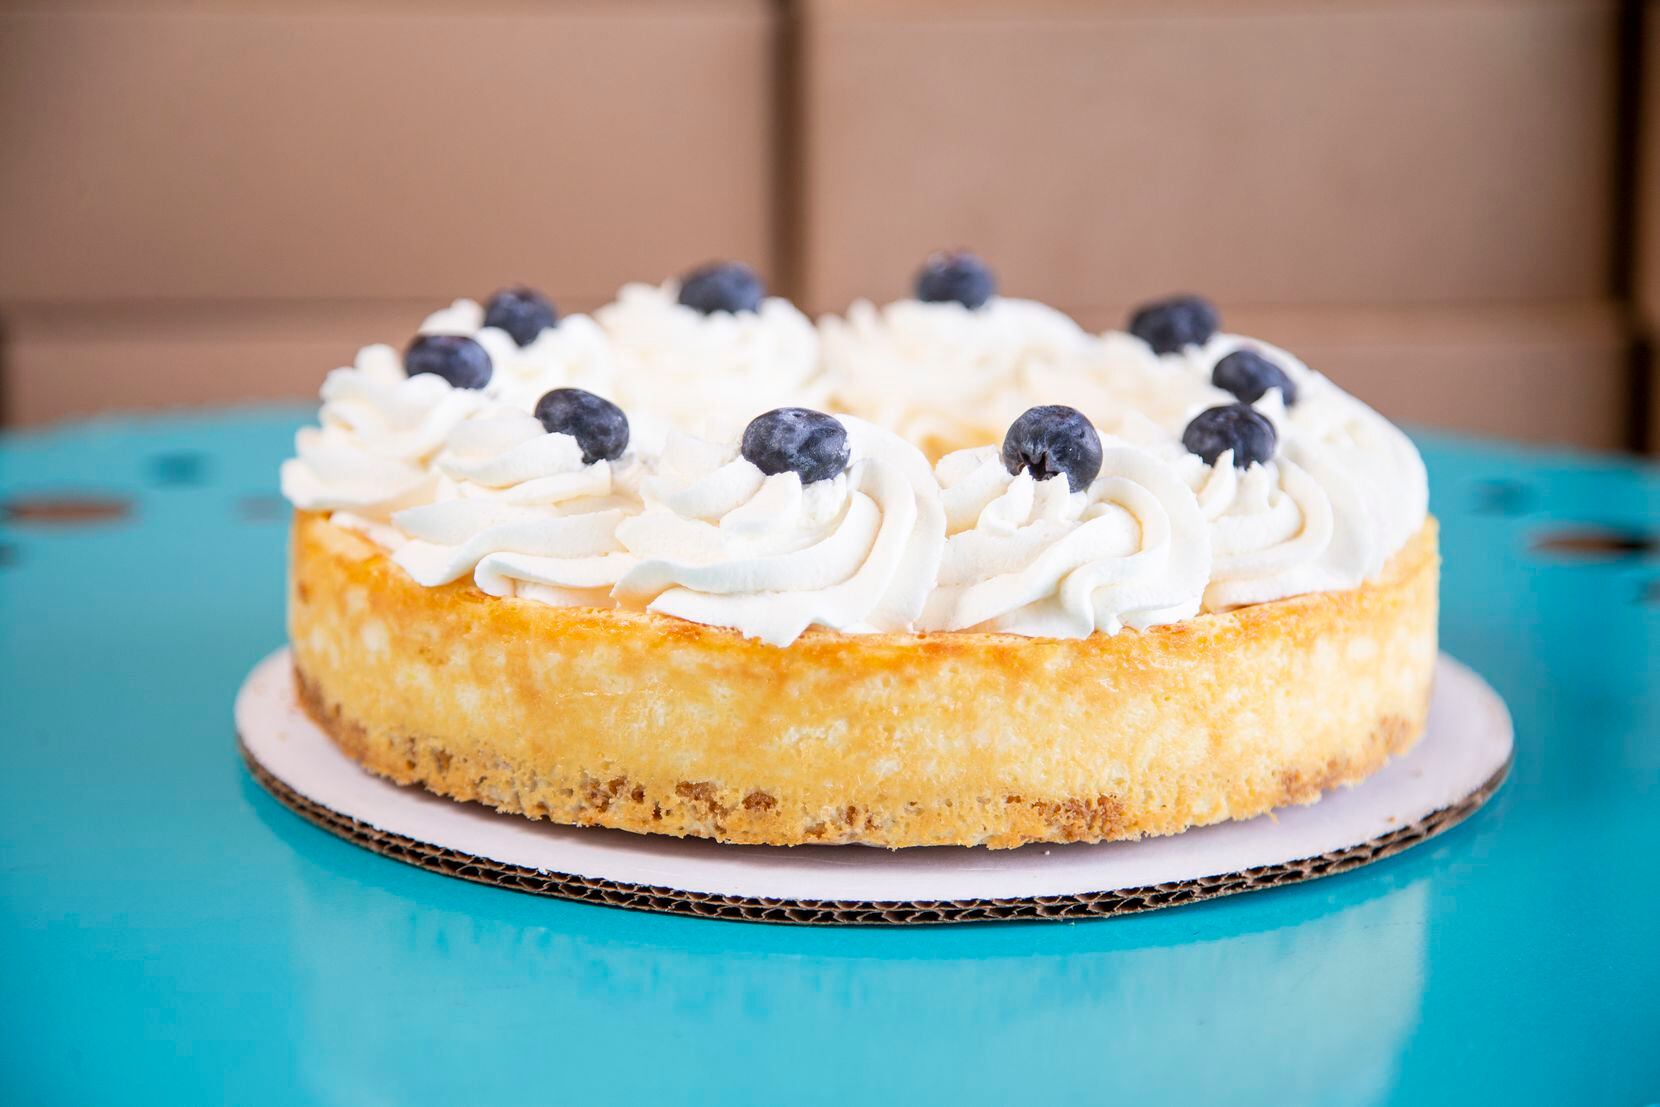 A Lemon Ice Box Pie at Humble Simply Good Pies in East Dallas in 2020